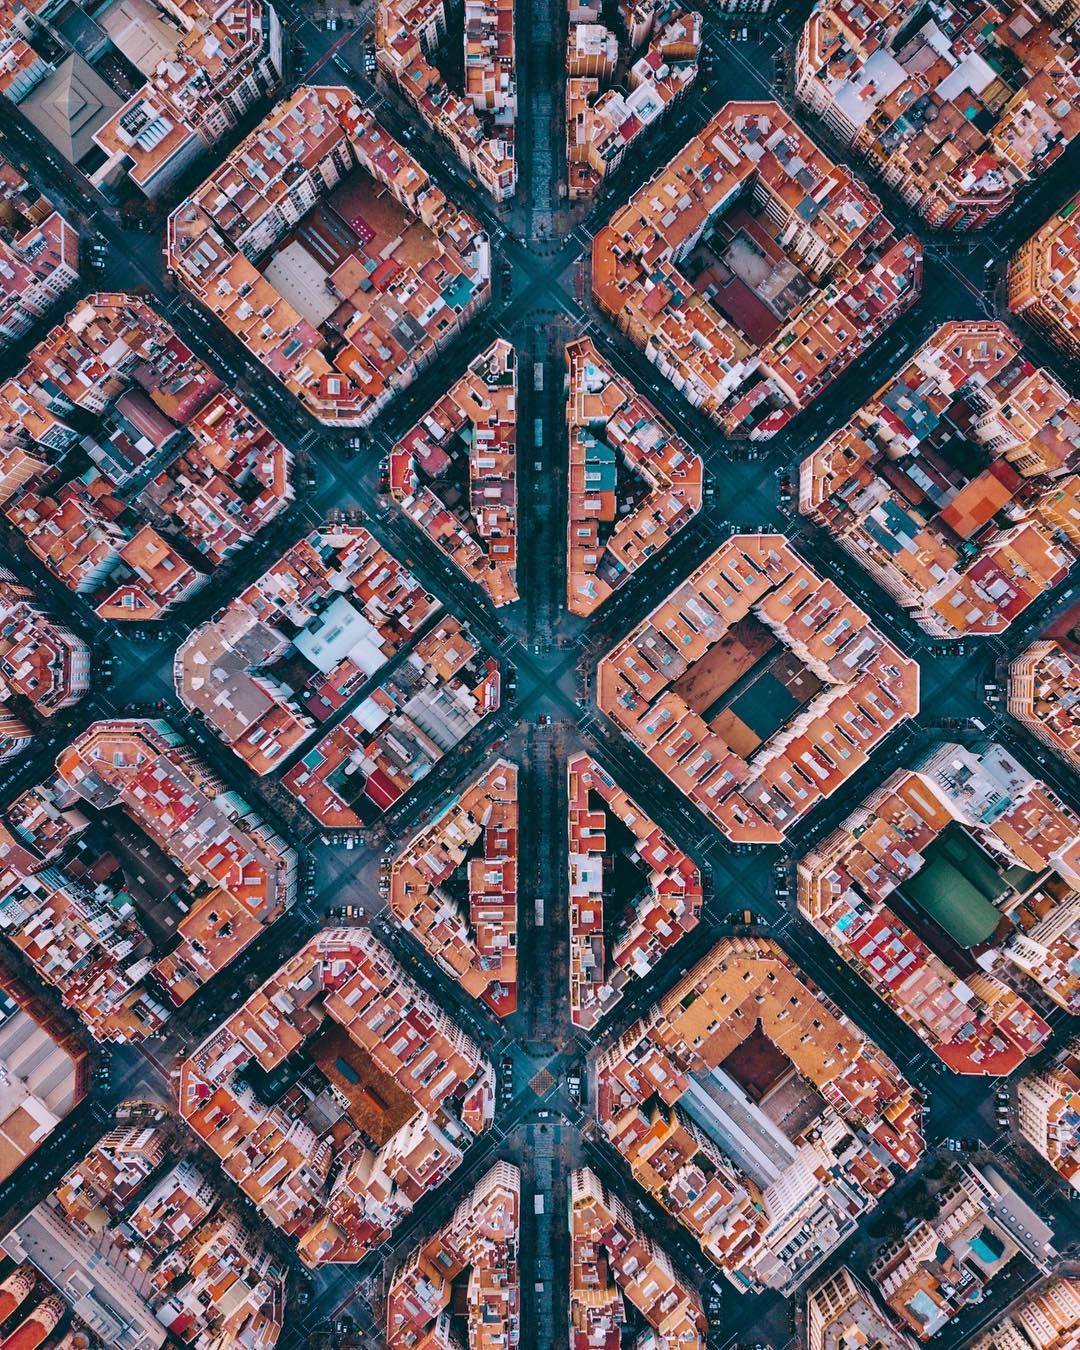 Spectacular Drone Photography by NKCHU